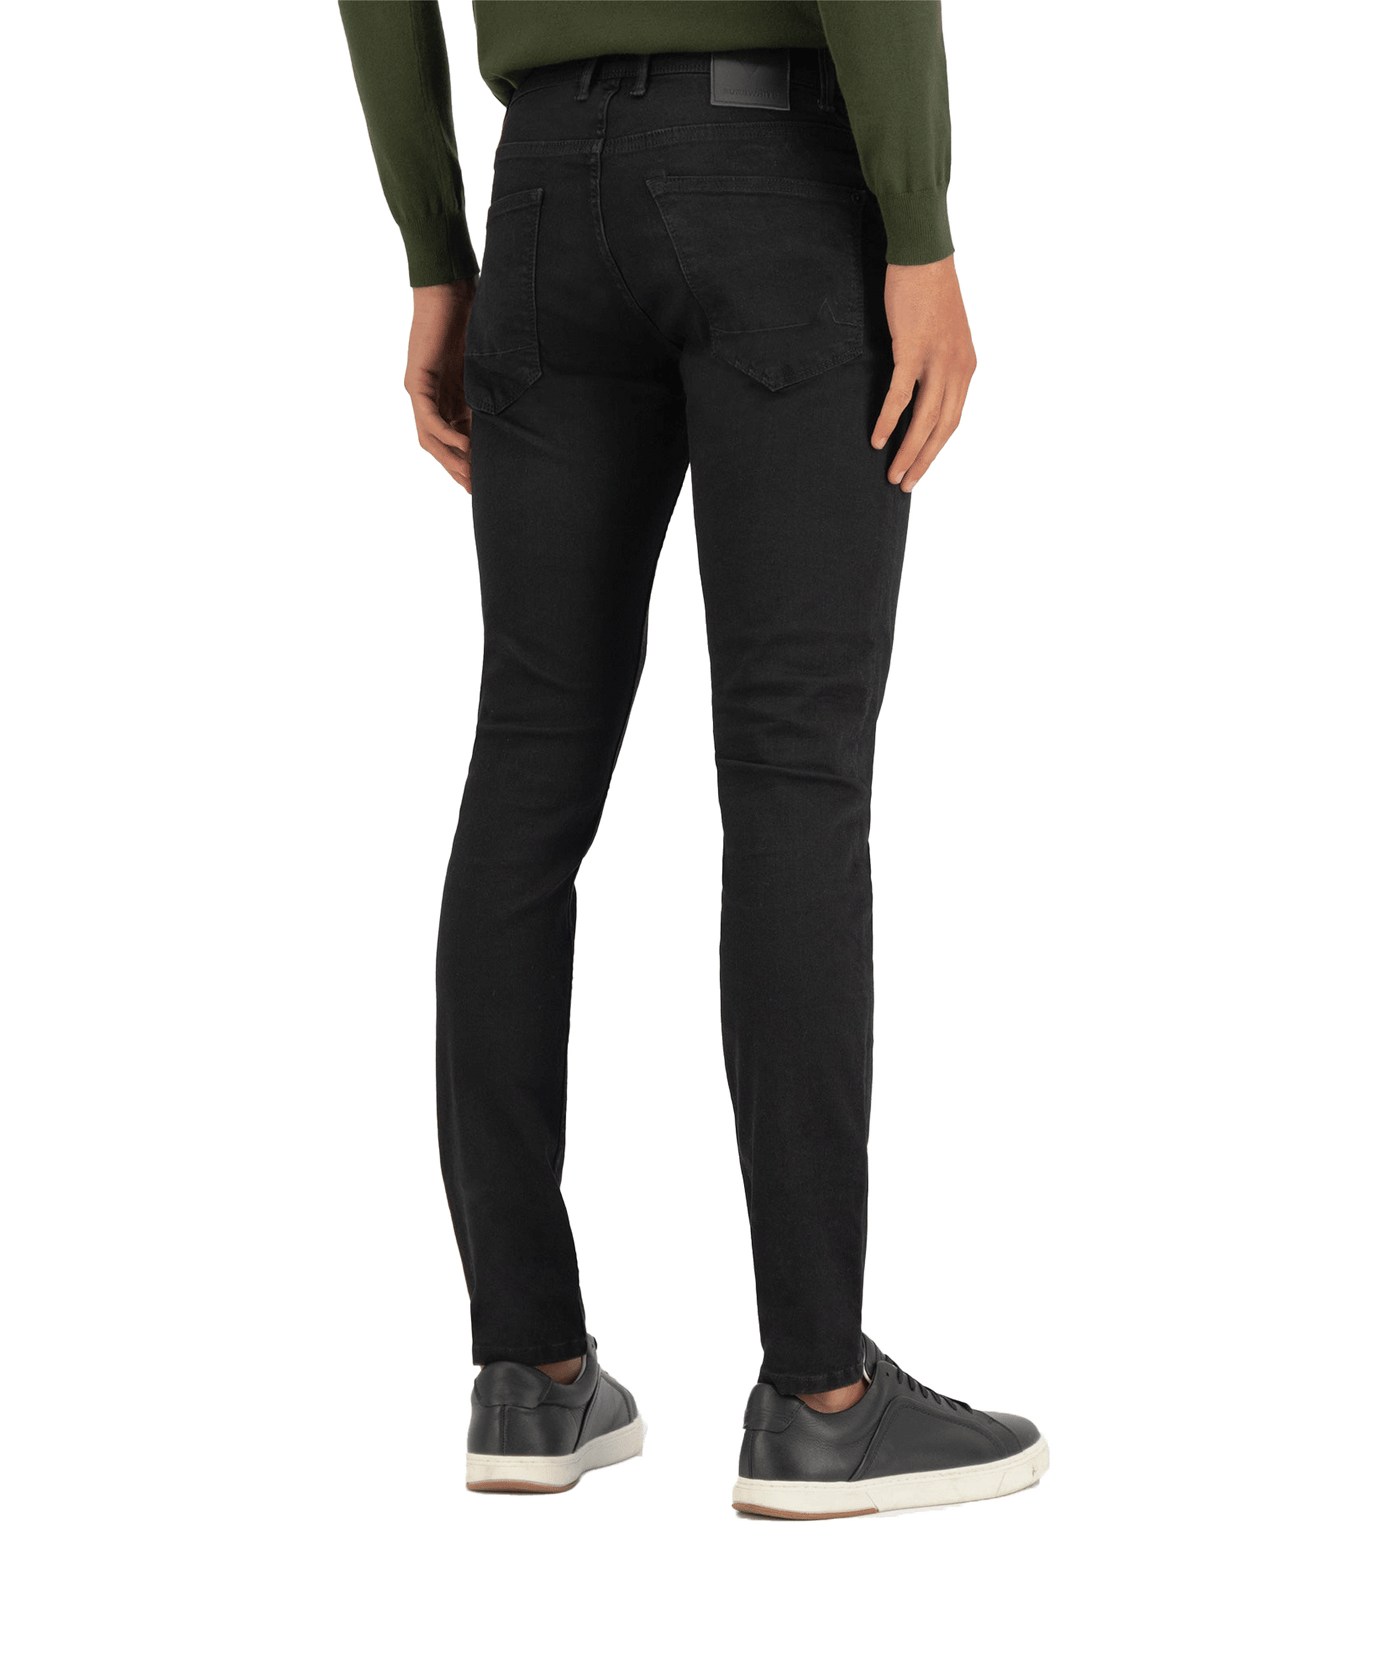 PureWhite - Slim Fit Black Jeans, Detailed With Black